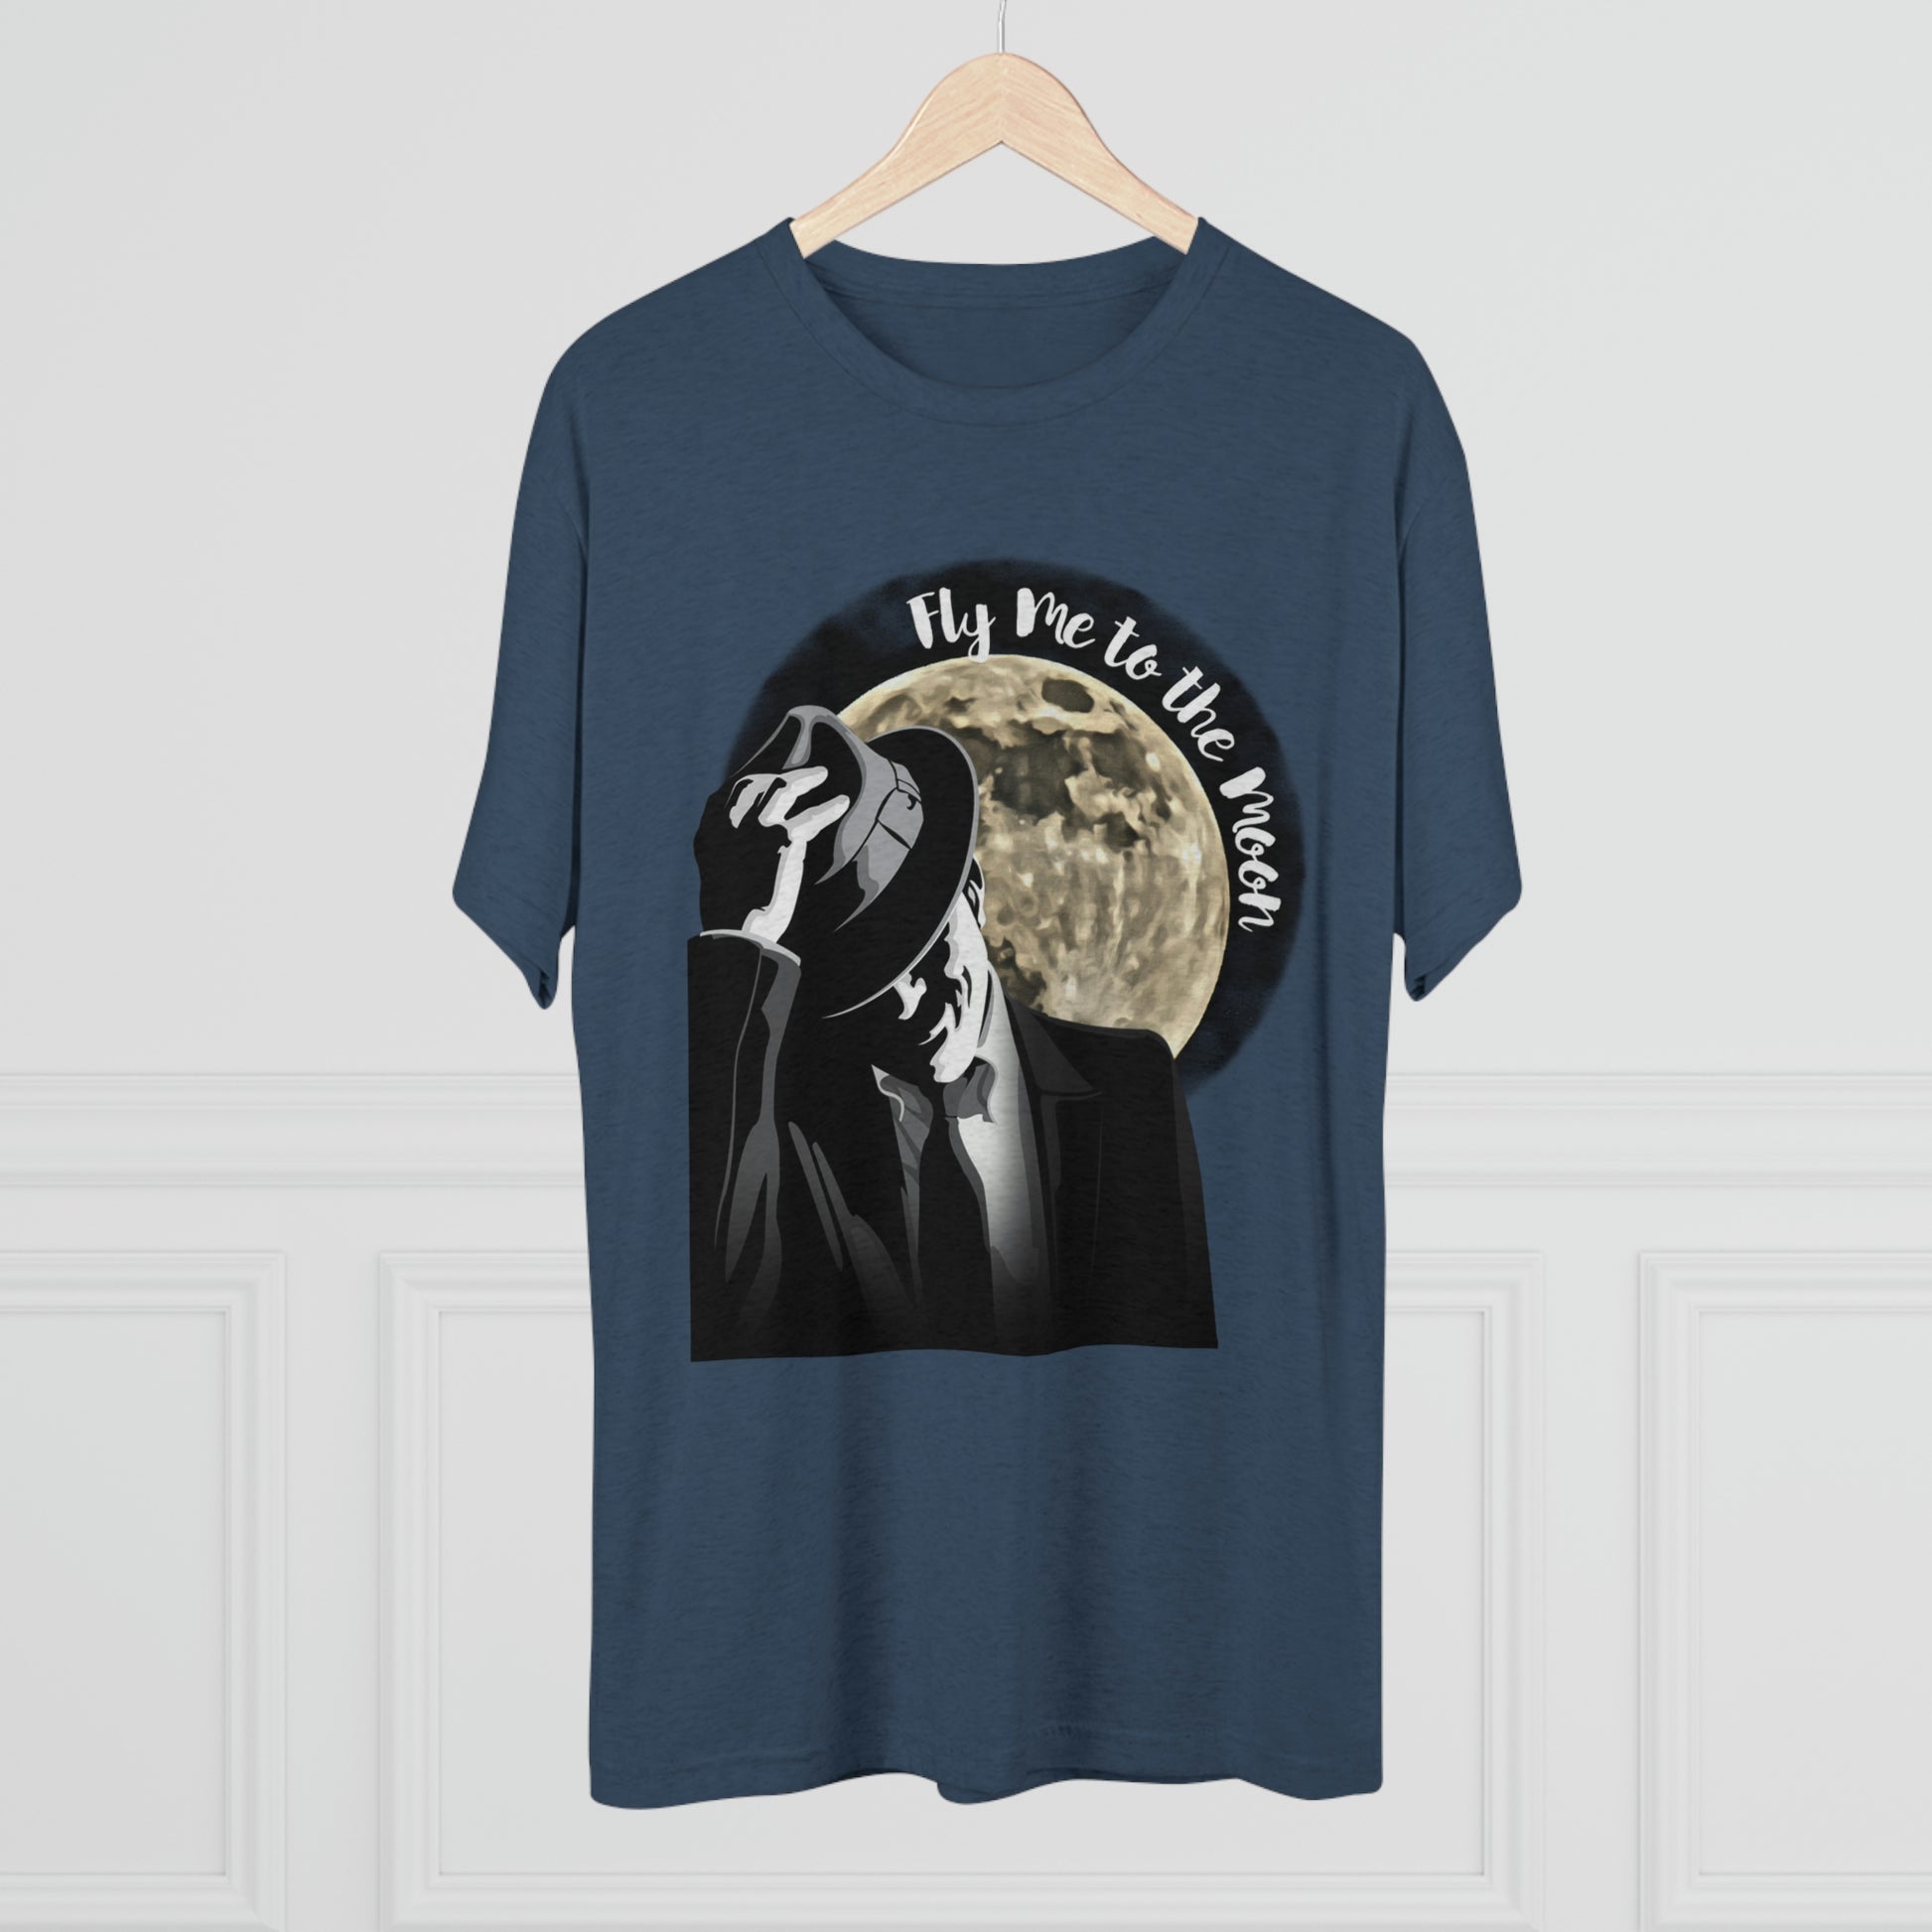 Frank Sinatra T-shirt, Fly to The Moon, Unisex Tee Shirt Everloved Portraits & Apparel